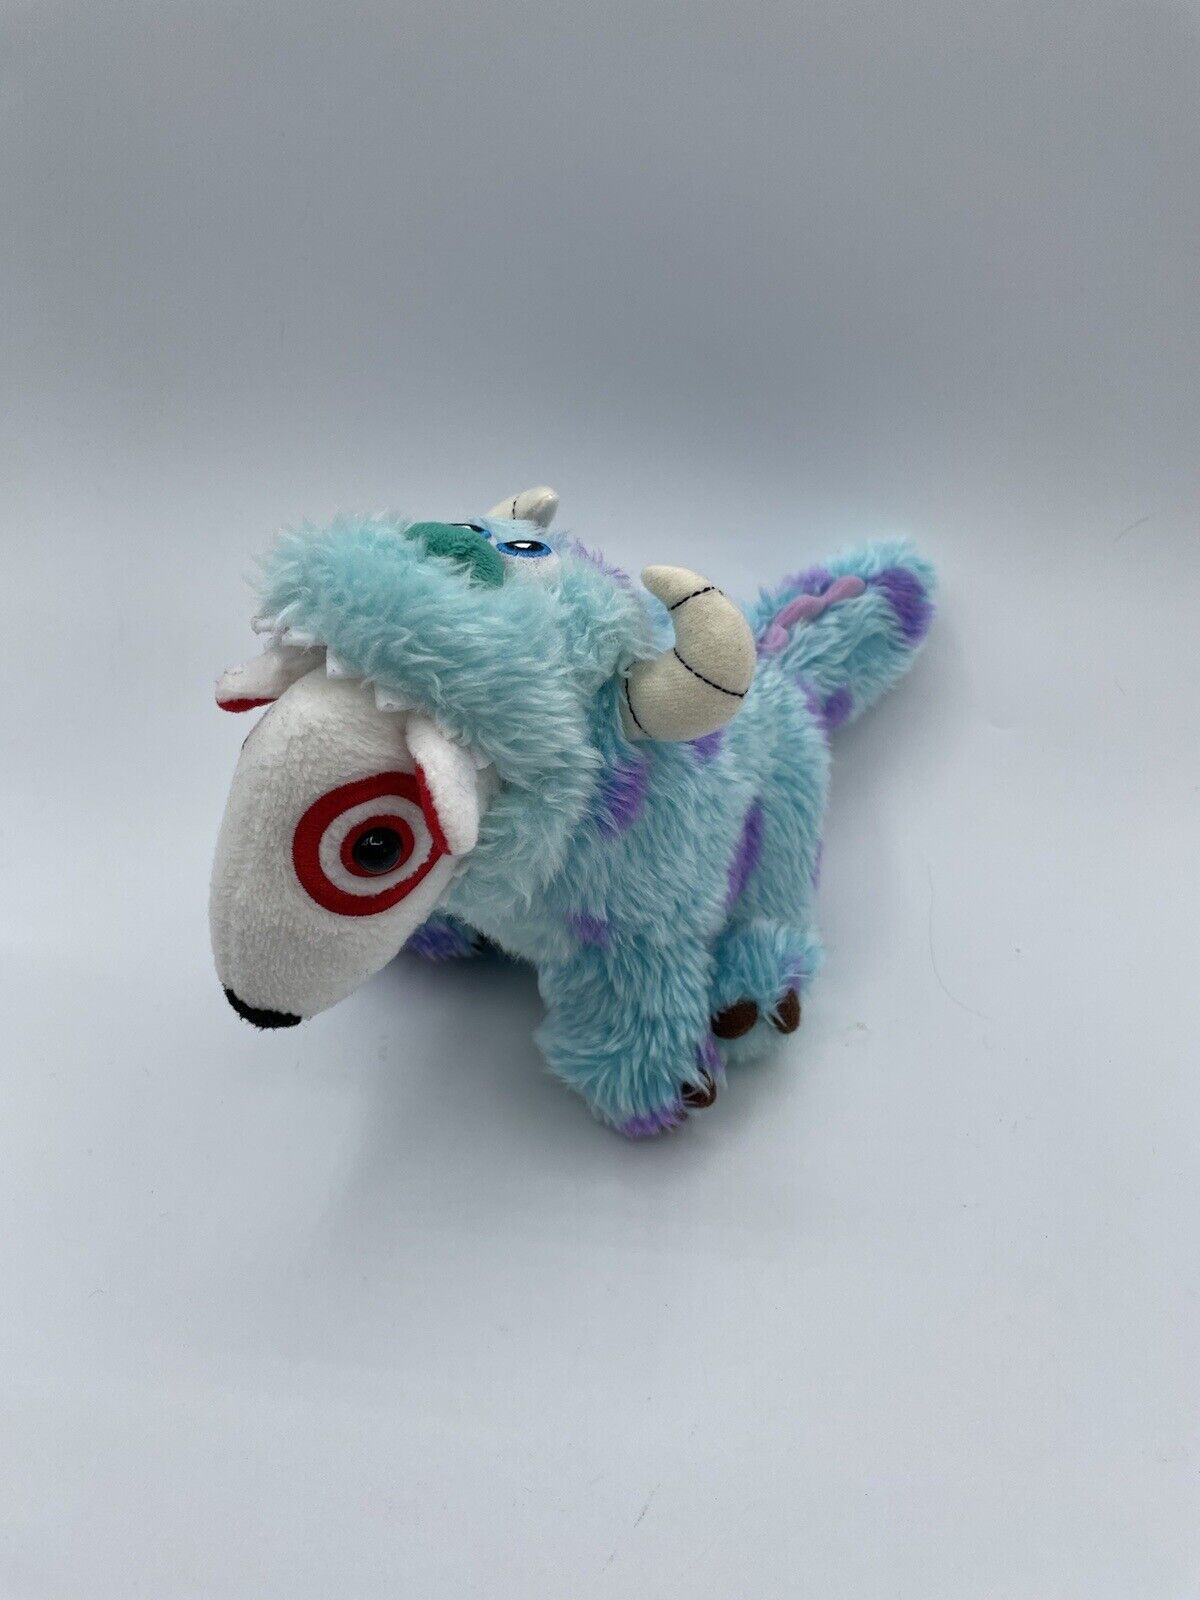 Disney 2013 Target Dog Plush Costume Sully Monsters Inc Blue Suit 1389 Of 4000